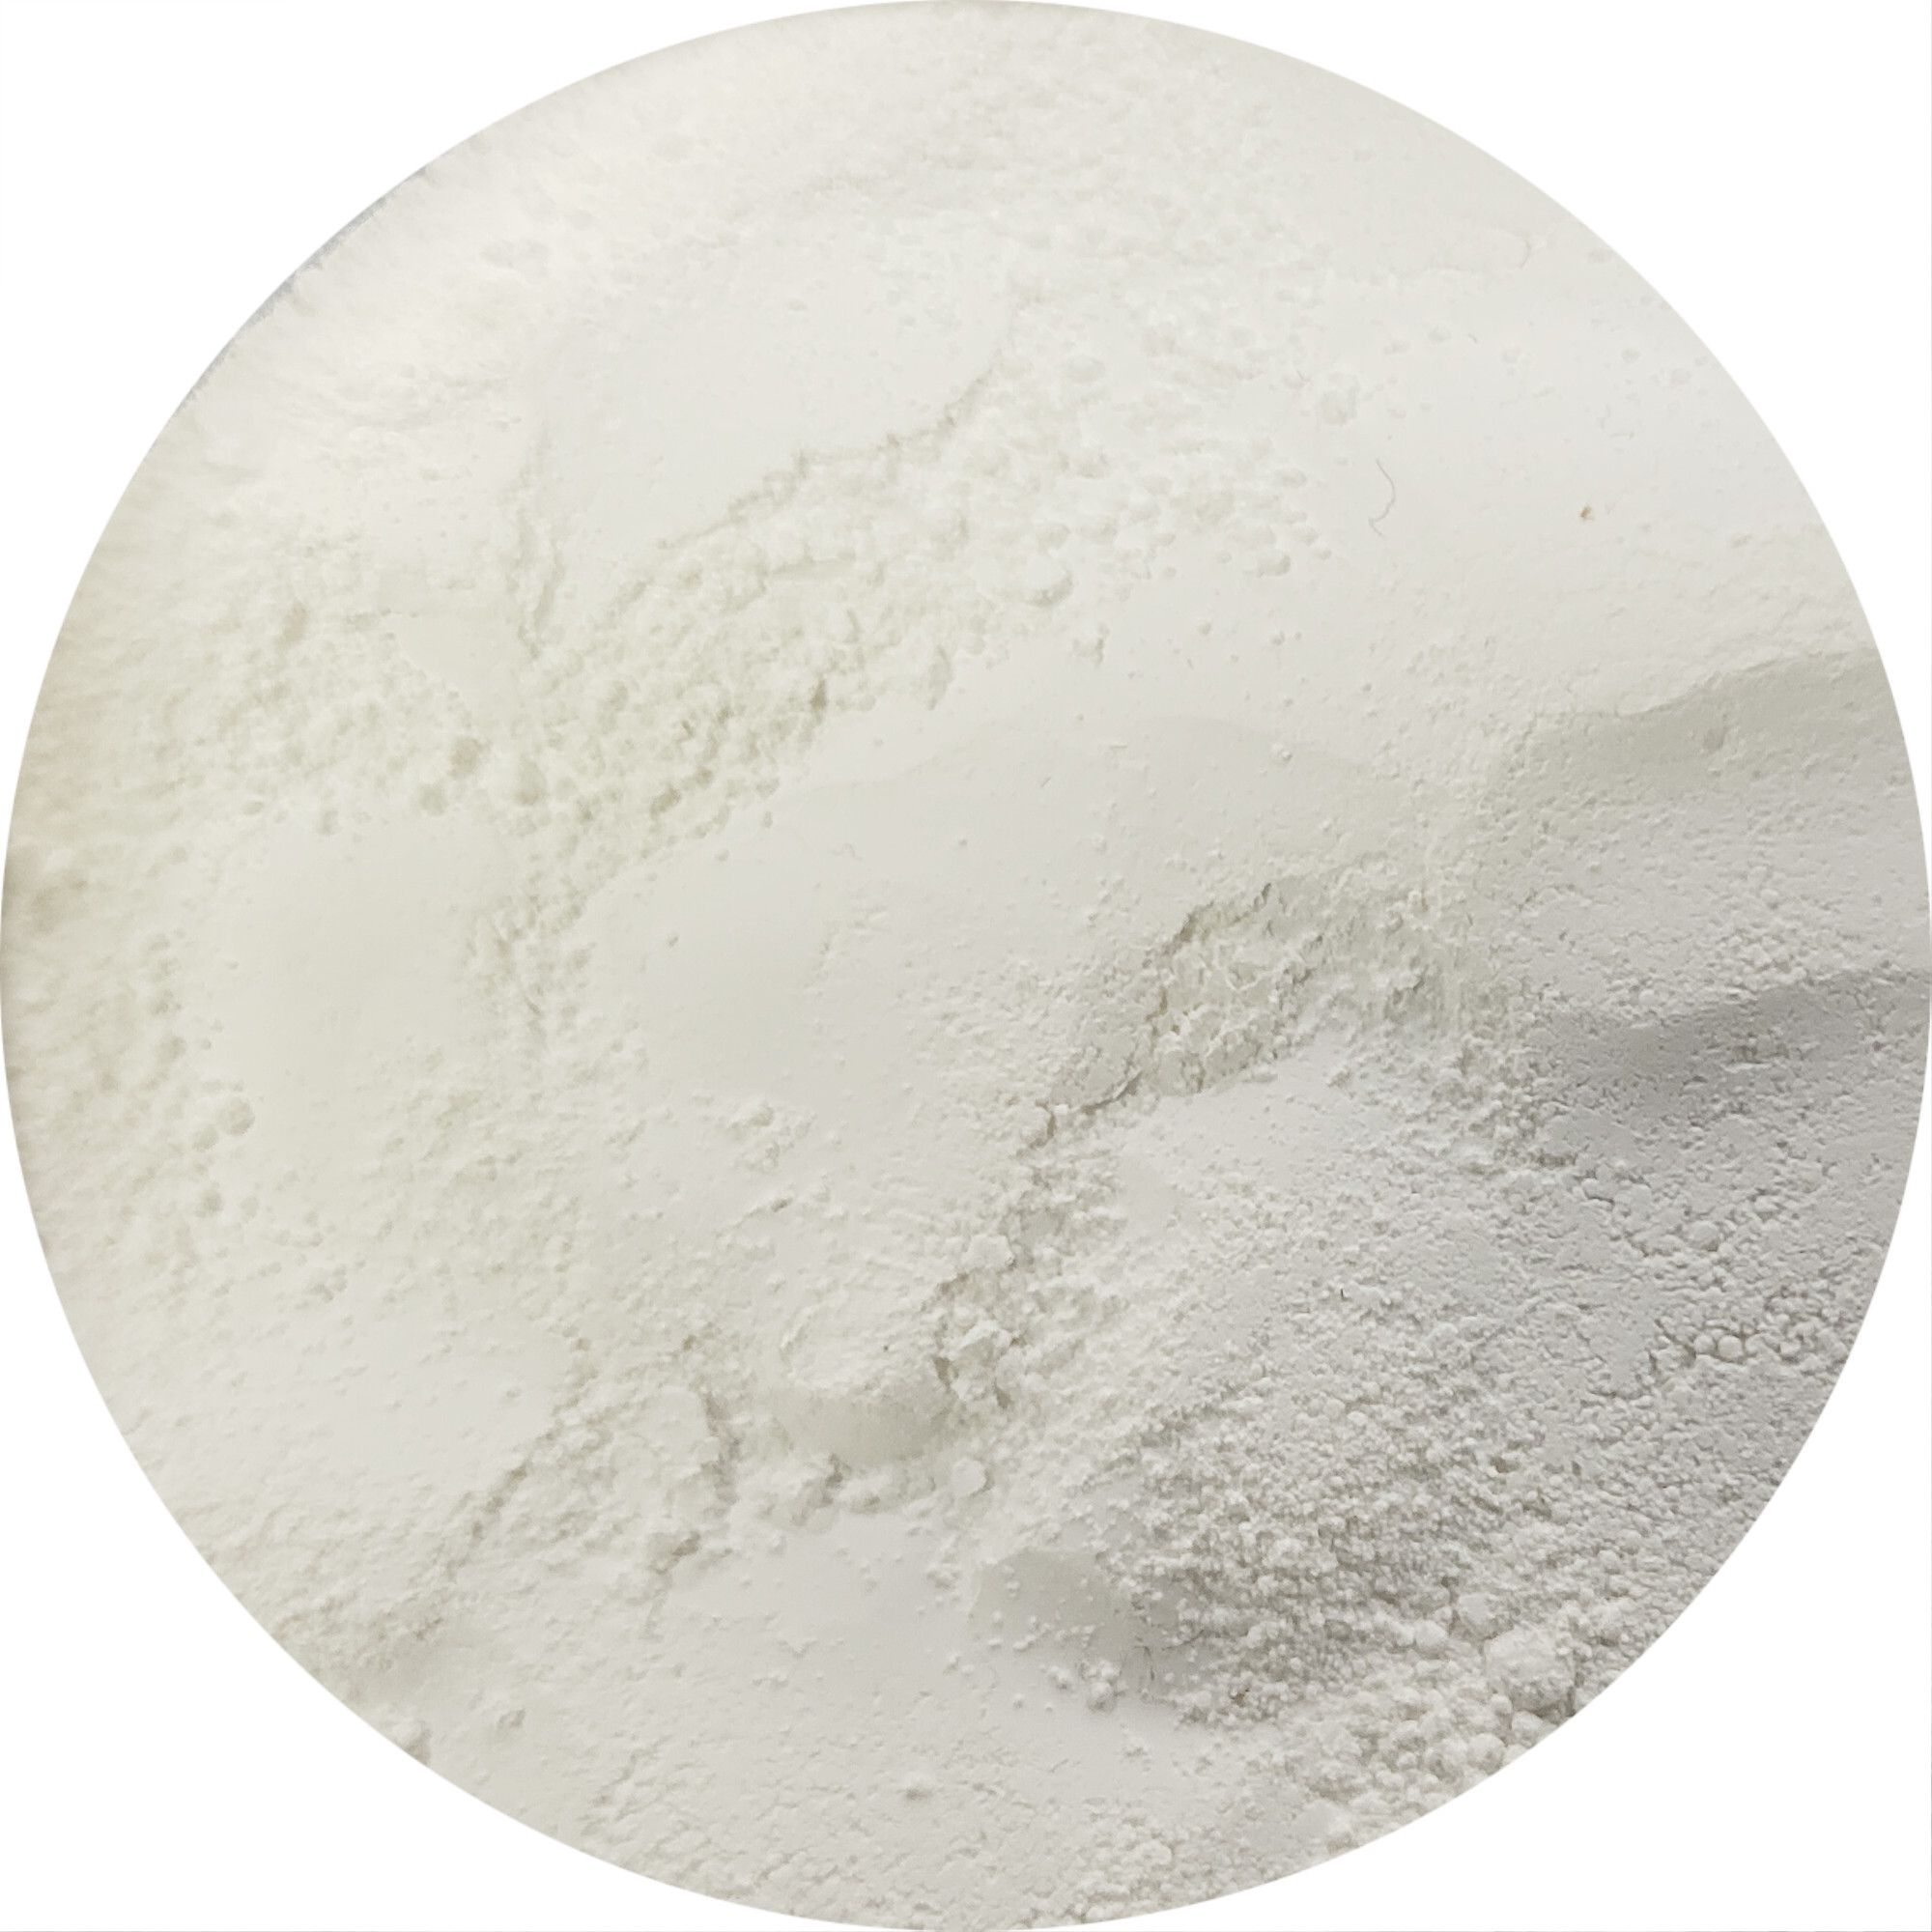 China Wholesale Baby Skin Whitening Suppliers Factories - Sunsafe-T201OT / Titanium dioxide(and) Alumina(and) Stearic Acid  – Uniproma